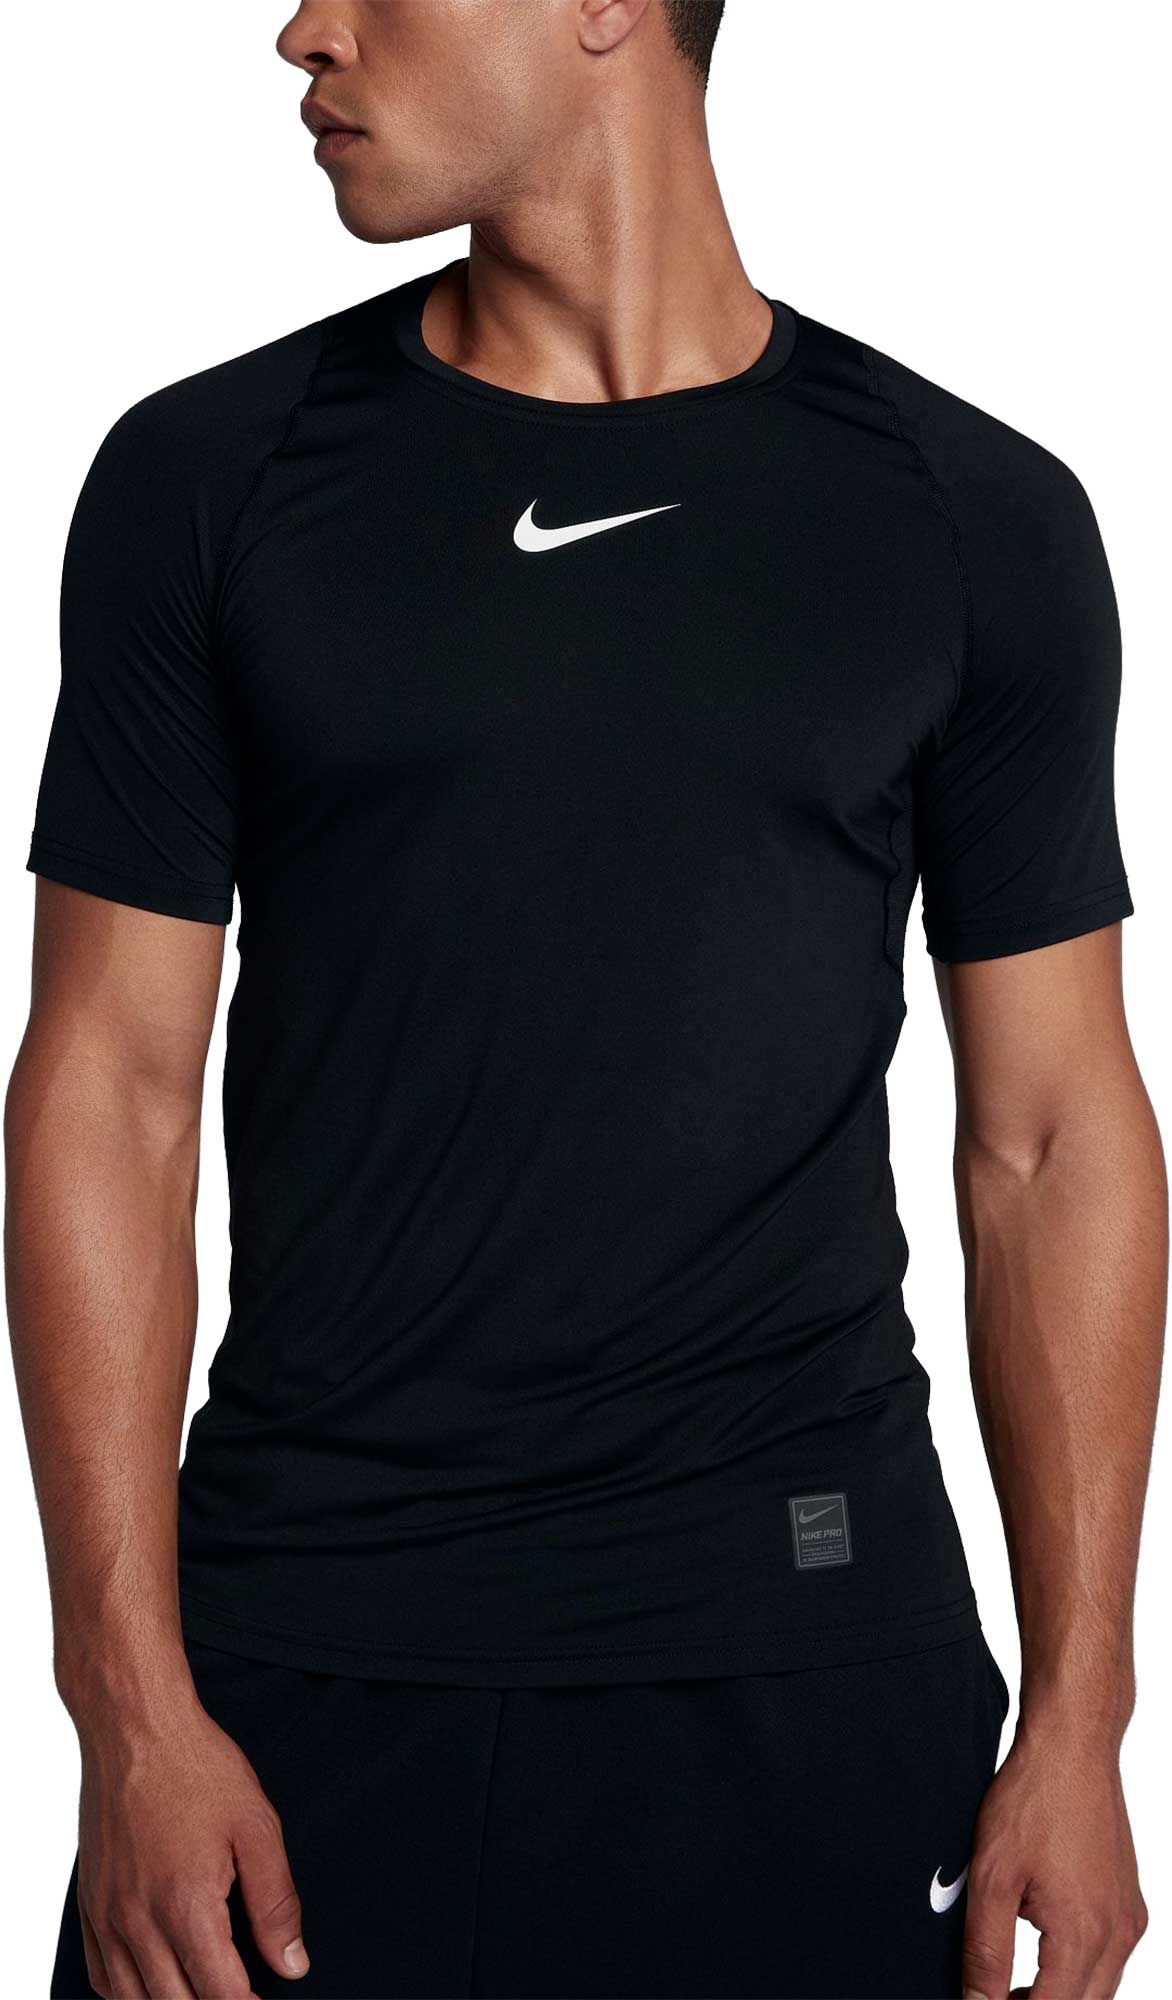 Nike Men's Pro Fitted T-Shirt - .97